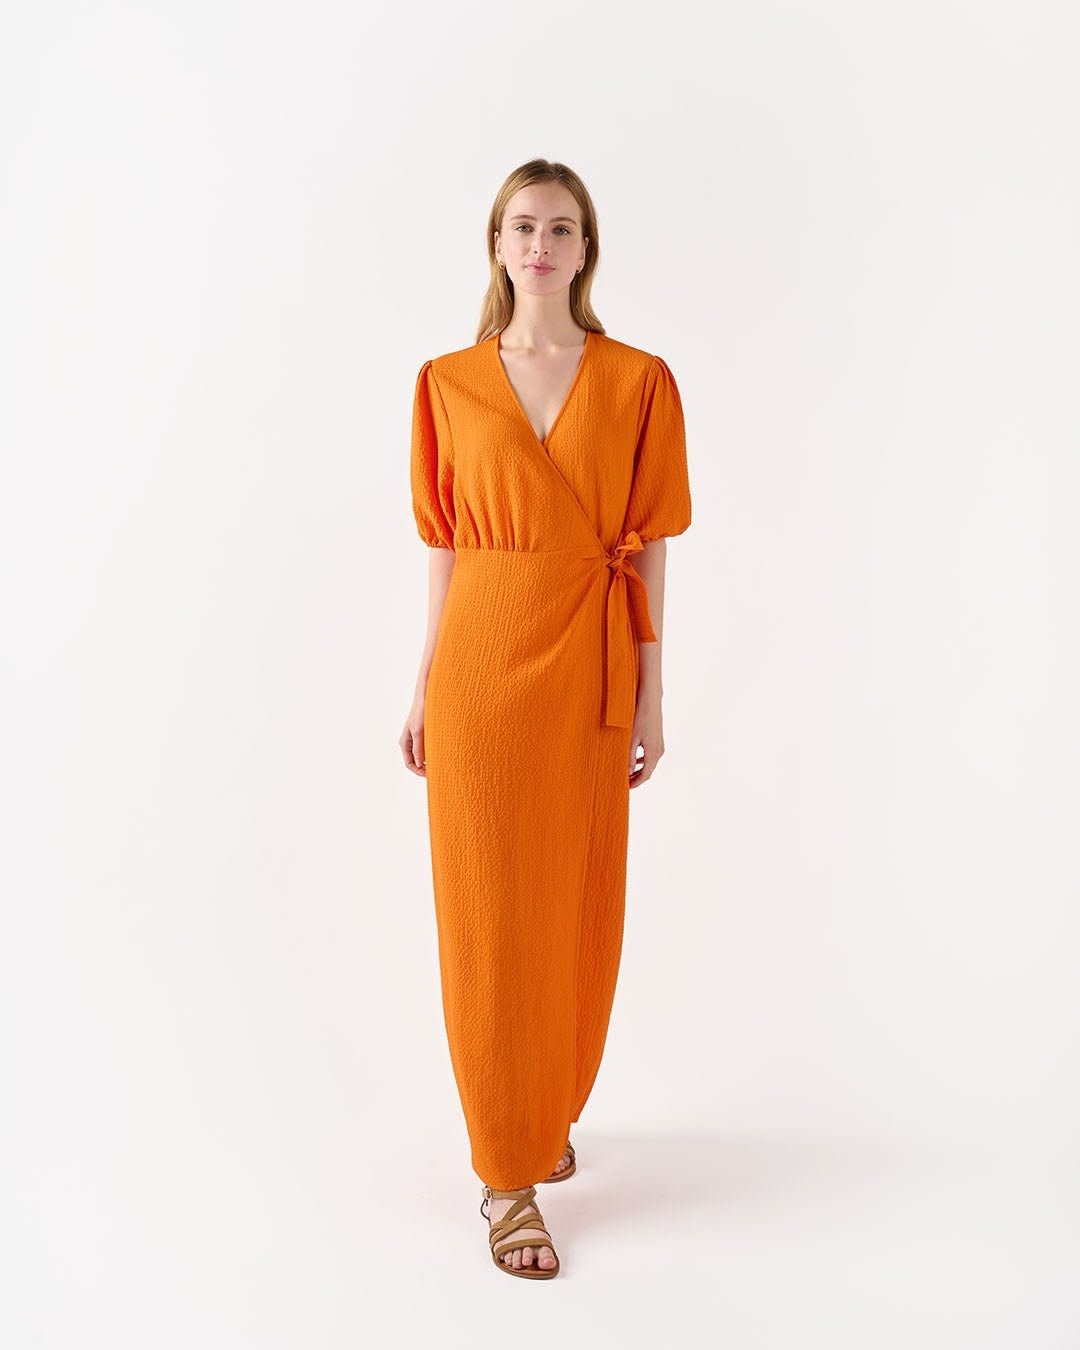 Another-Label Another-Label, Camille Bubble Dress, harvest pumpkin, M